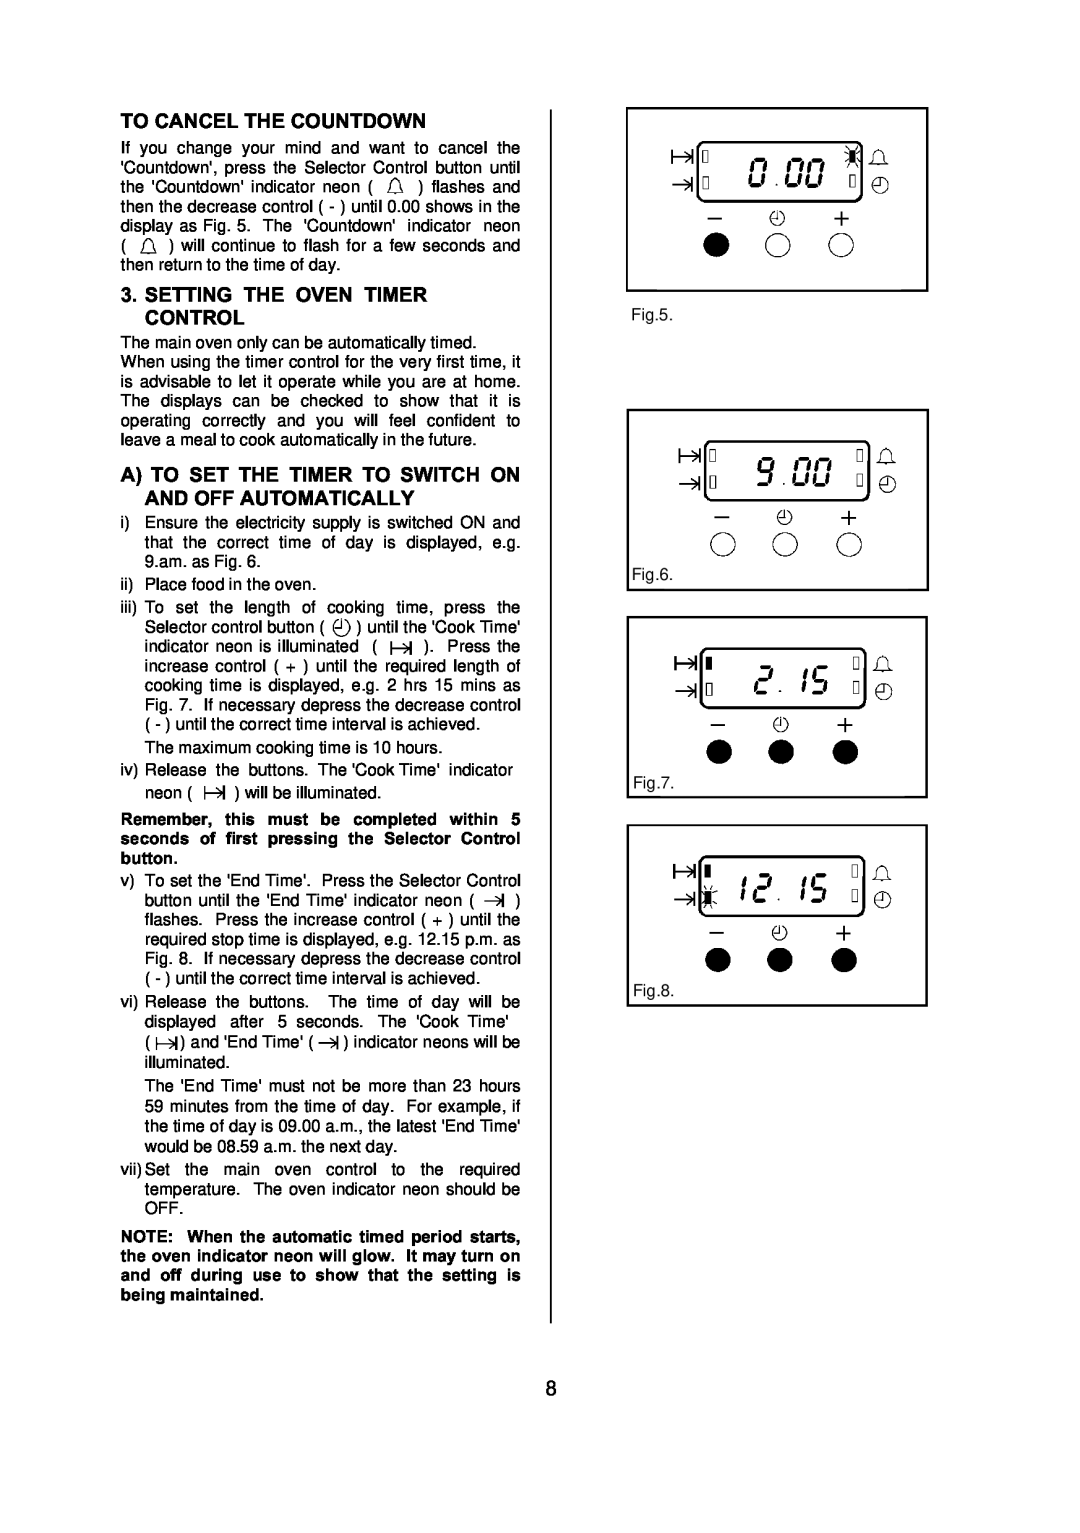 Electrolux D77000 user manual To Cancel The Countdown, Setting The Oven Timer Control 